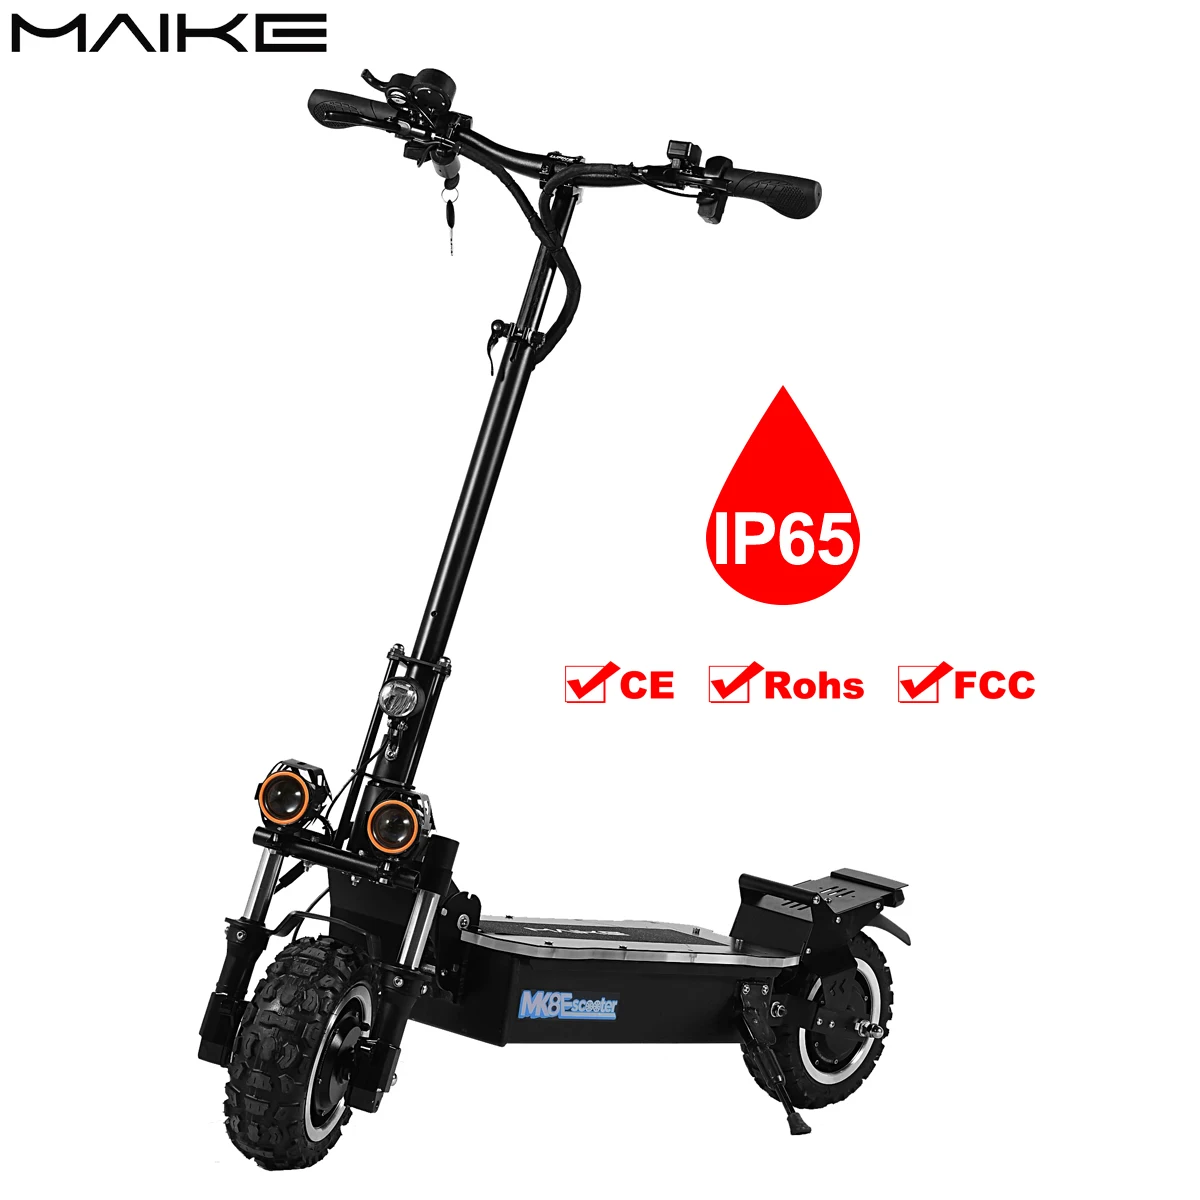 

Wholesale maike oem mk8 electric scooter 60v off road fastest 5000w electric scooter powerful adult two wheel